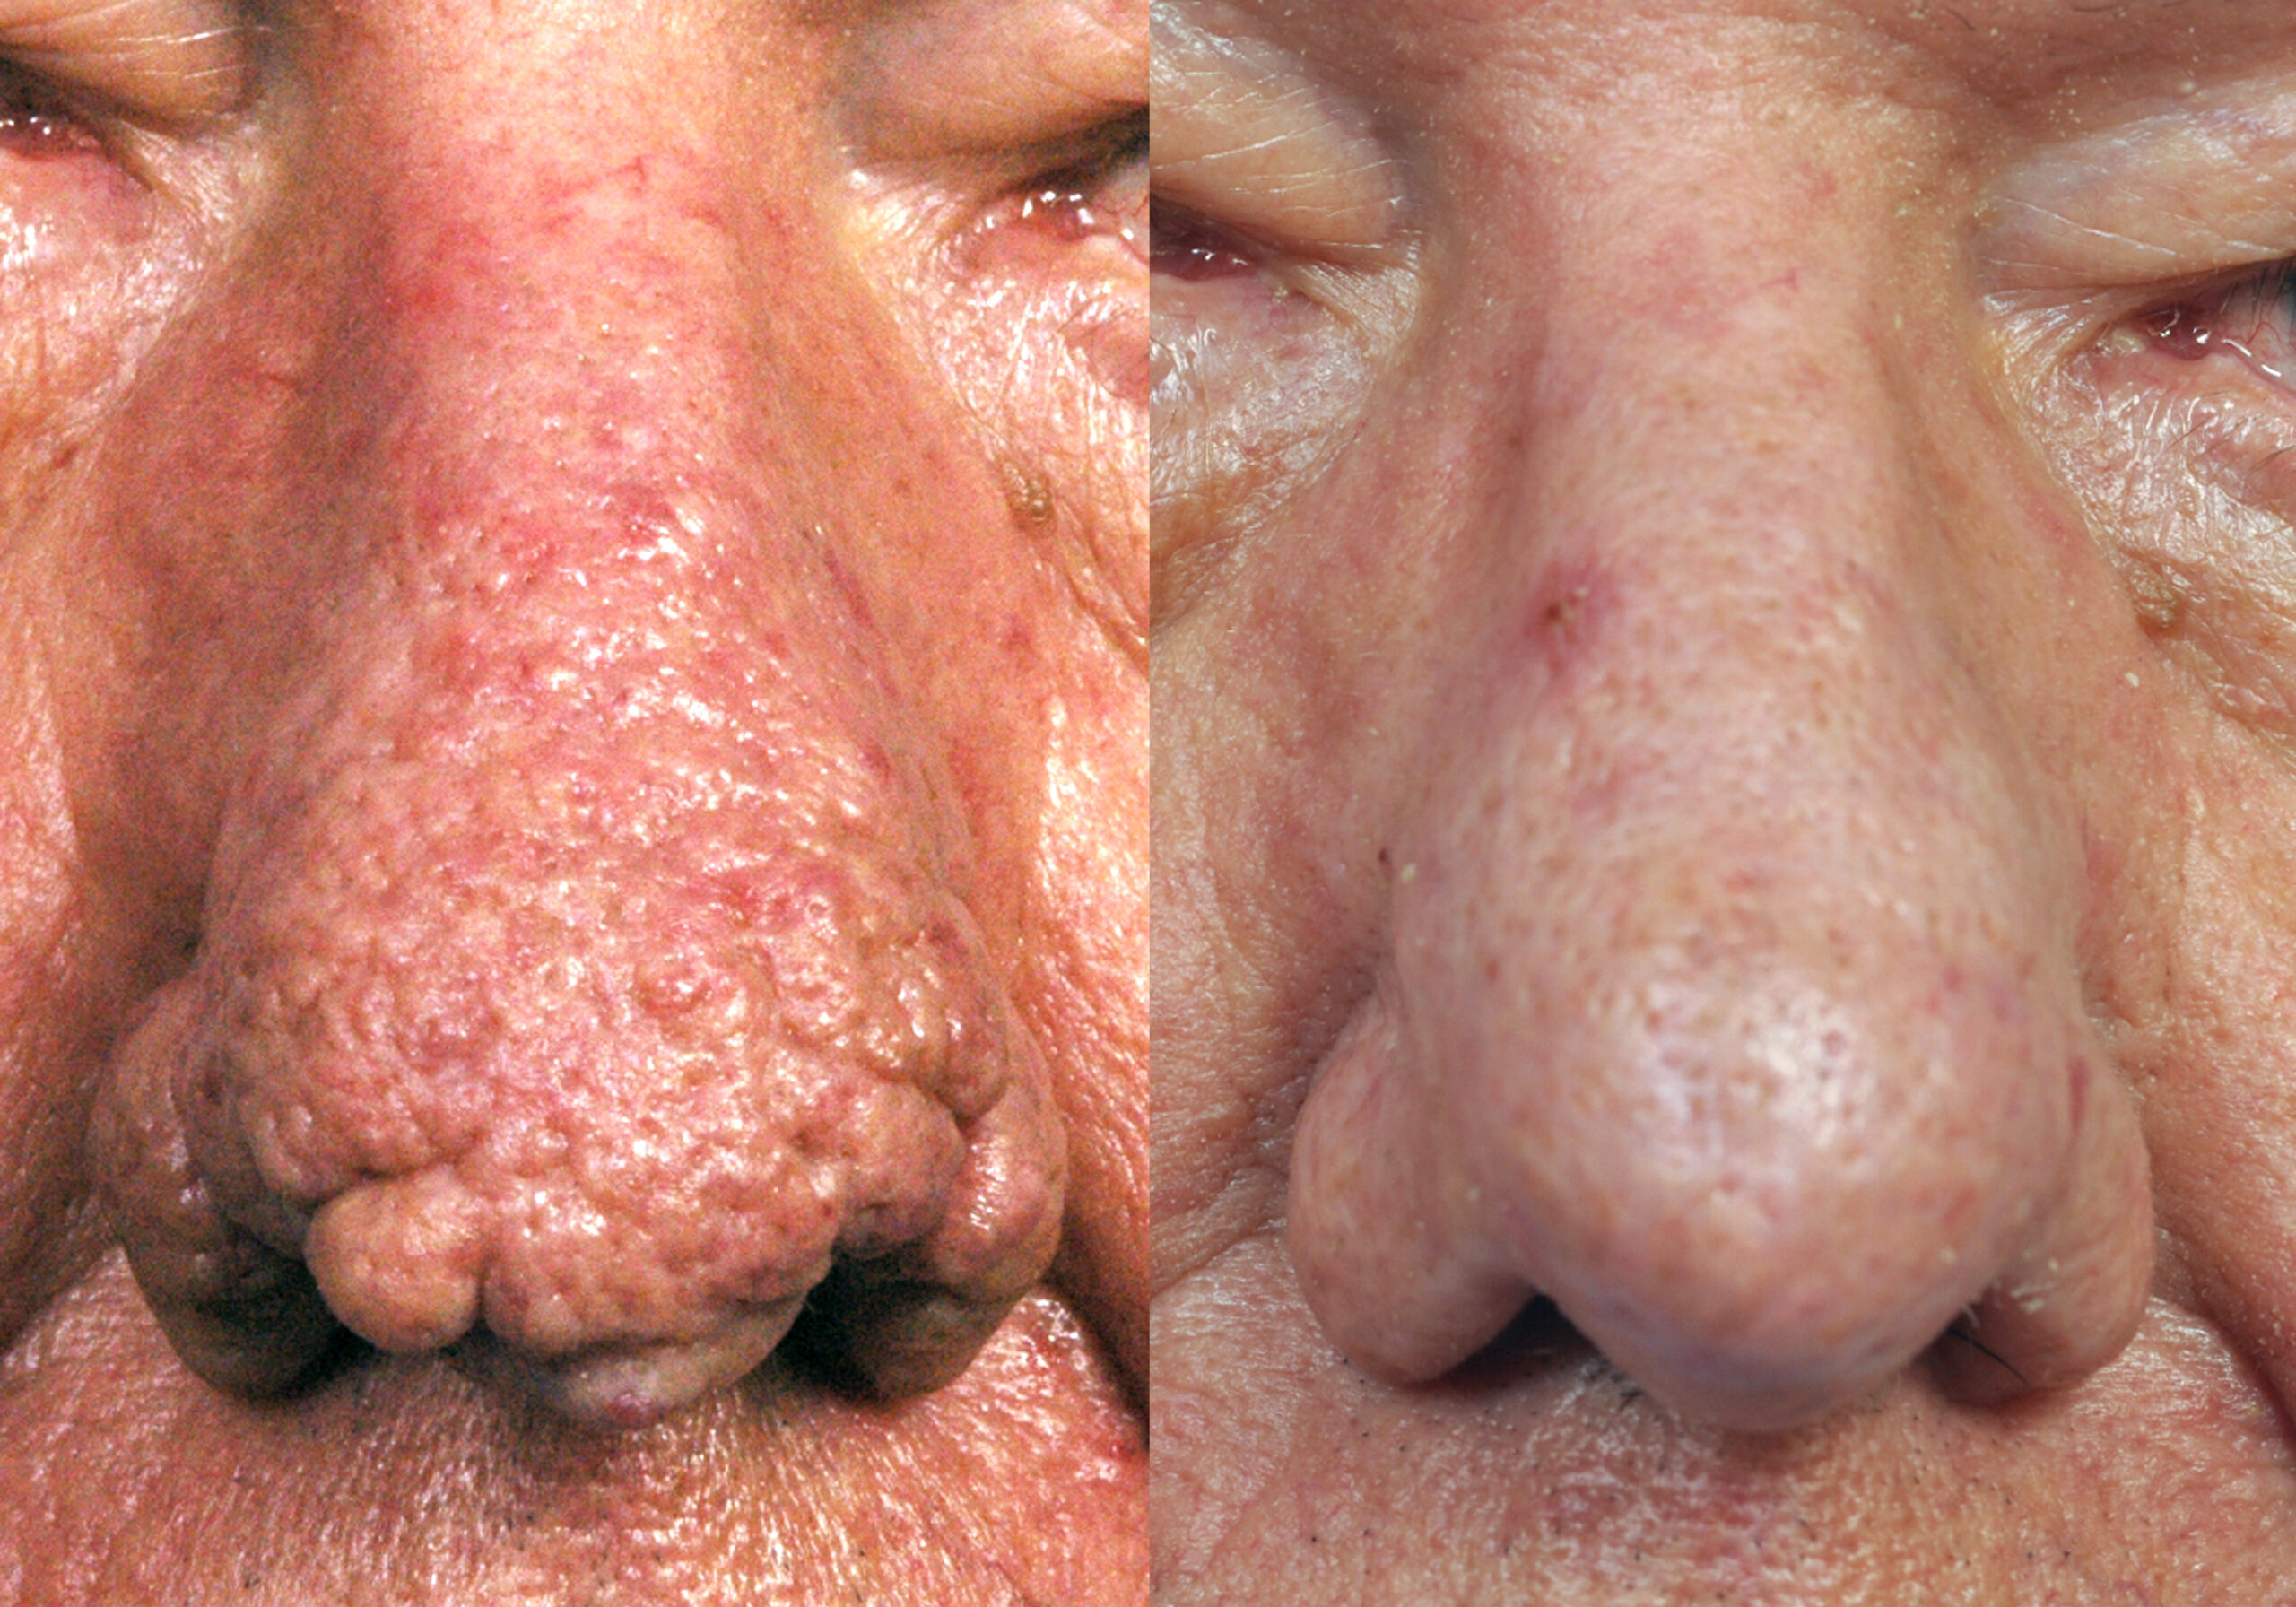 This patient received Dermabrasion to smooth the texture of his nose.